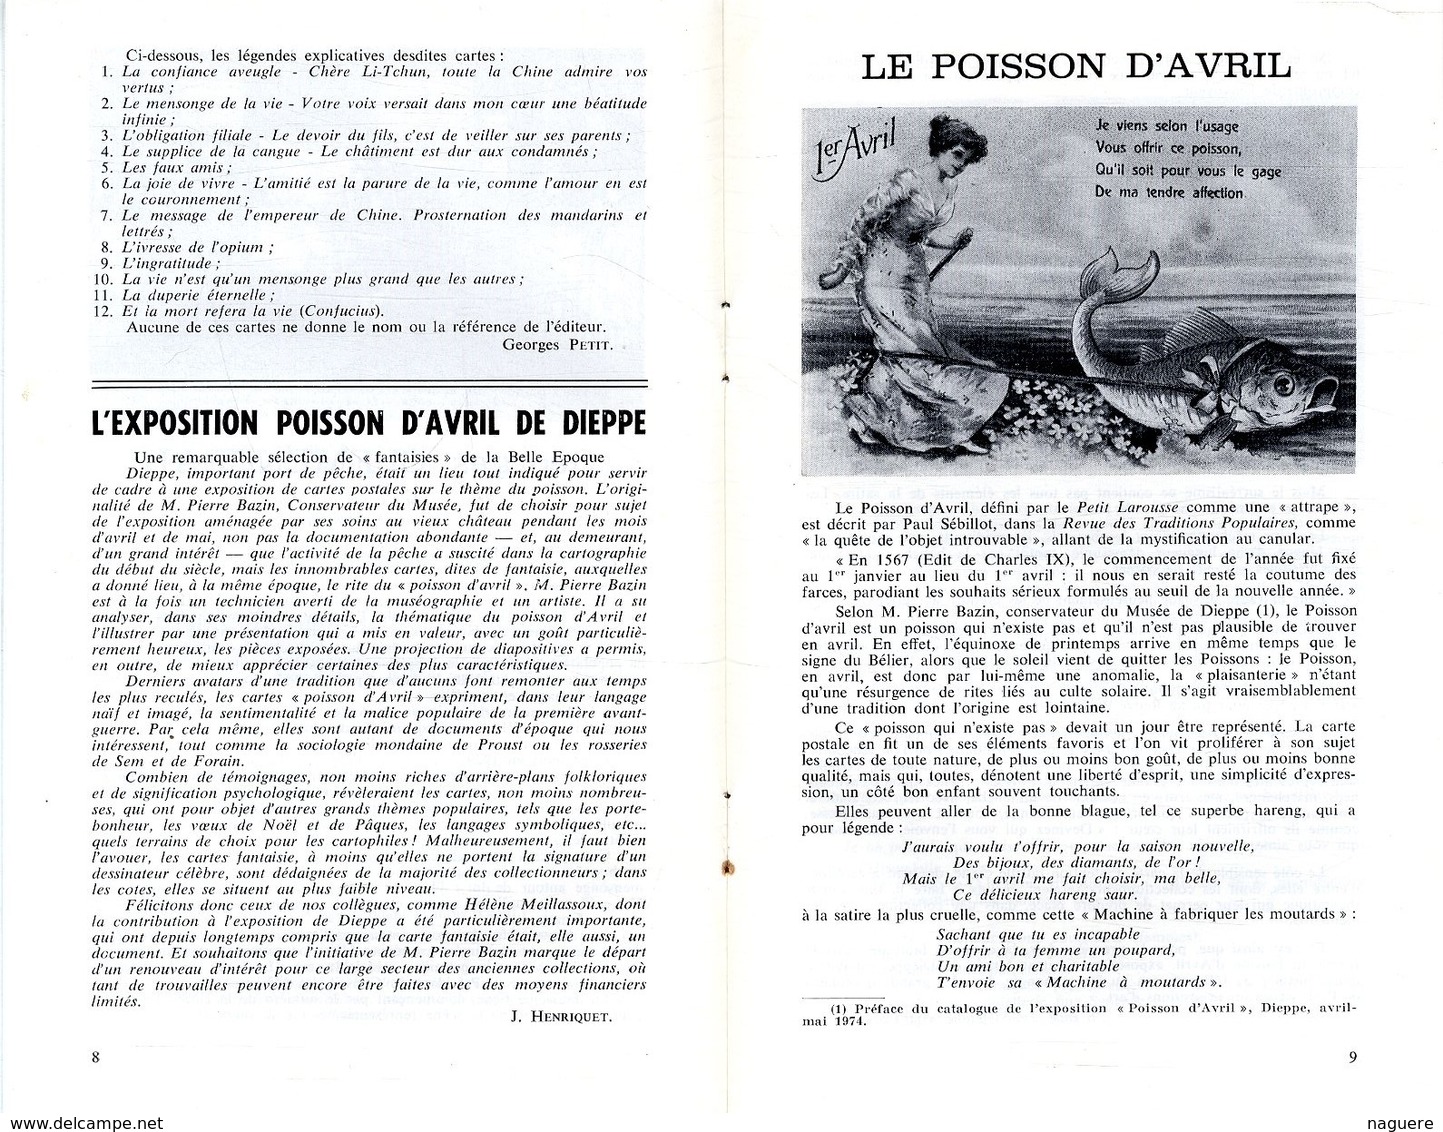 LE CARTOPHILE  JUIN 1974  N° 33  -  24 PAGES   29 AVRIL 1903 CLEMENCEAU LE POISSON D AVRIL THIERS  KIRCHNER  Etc - French